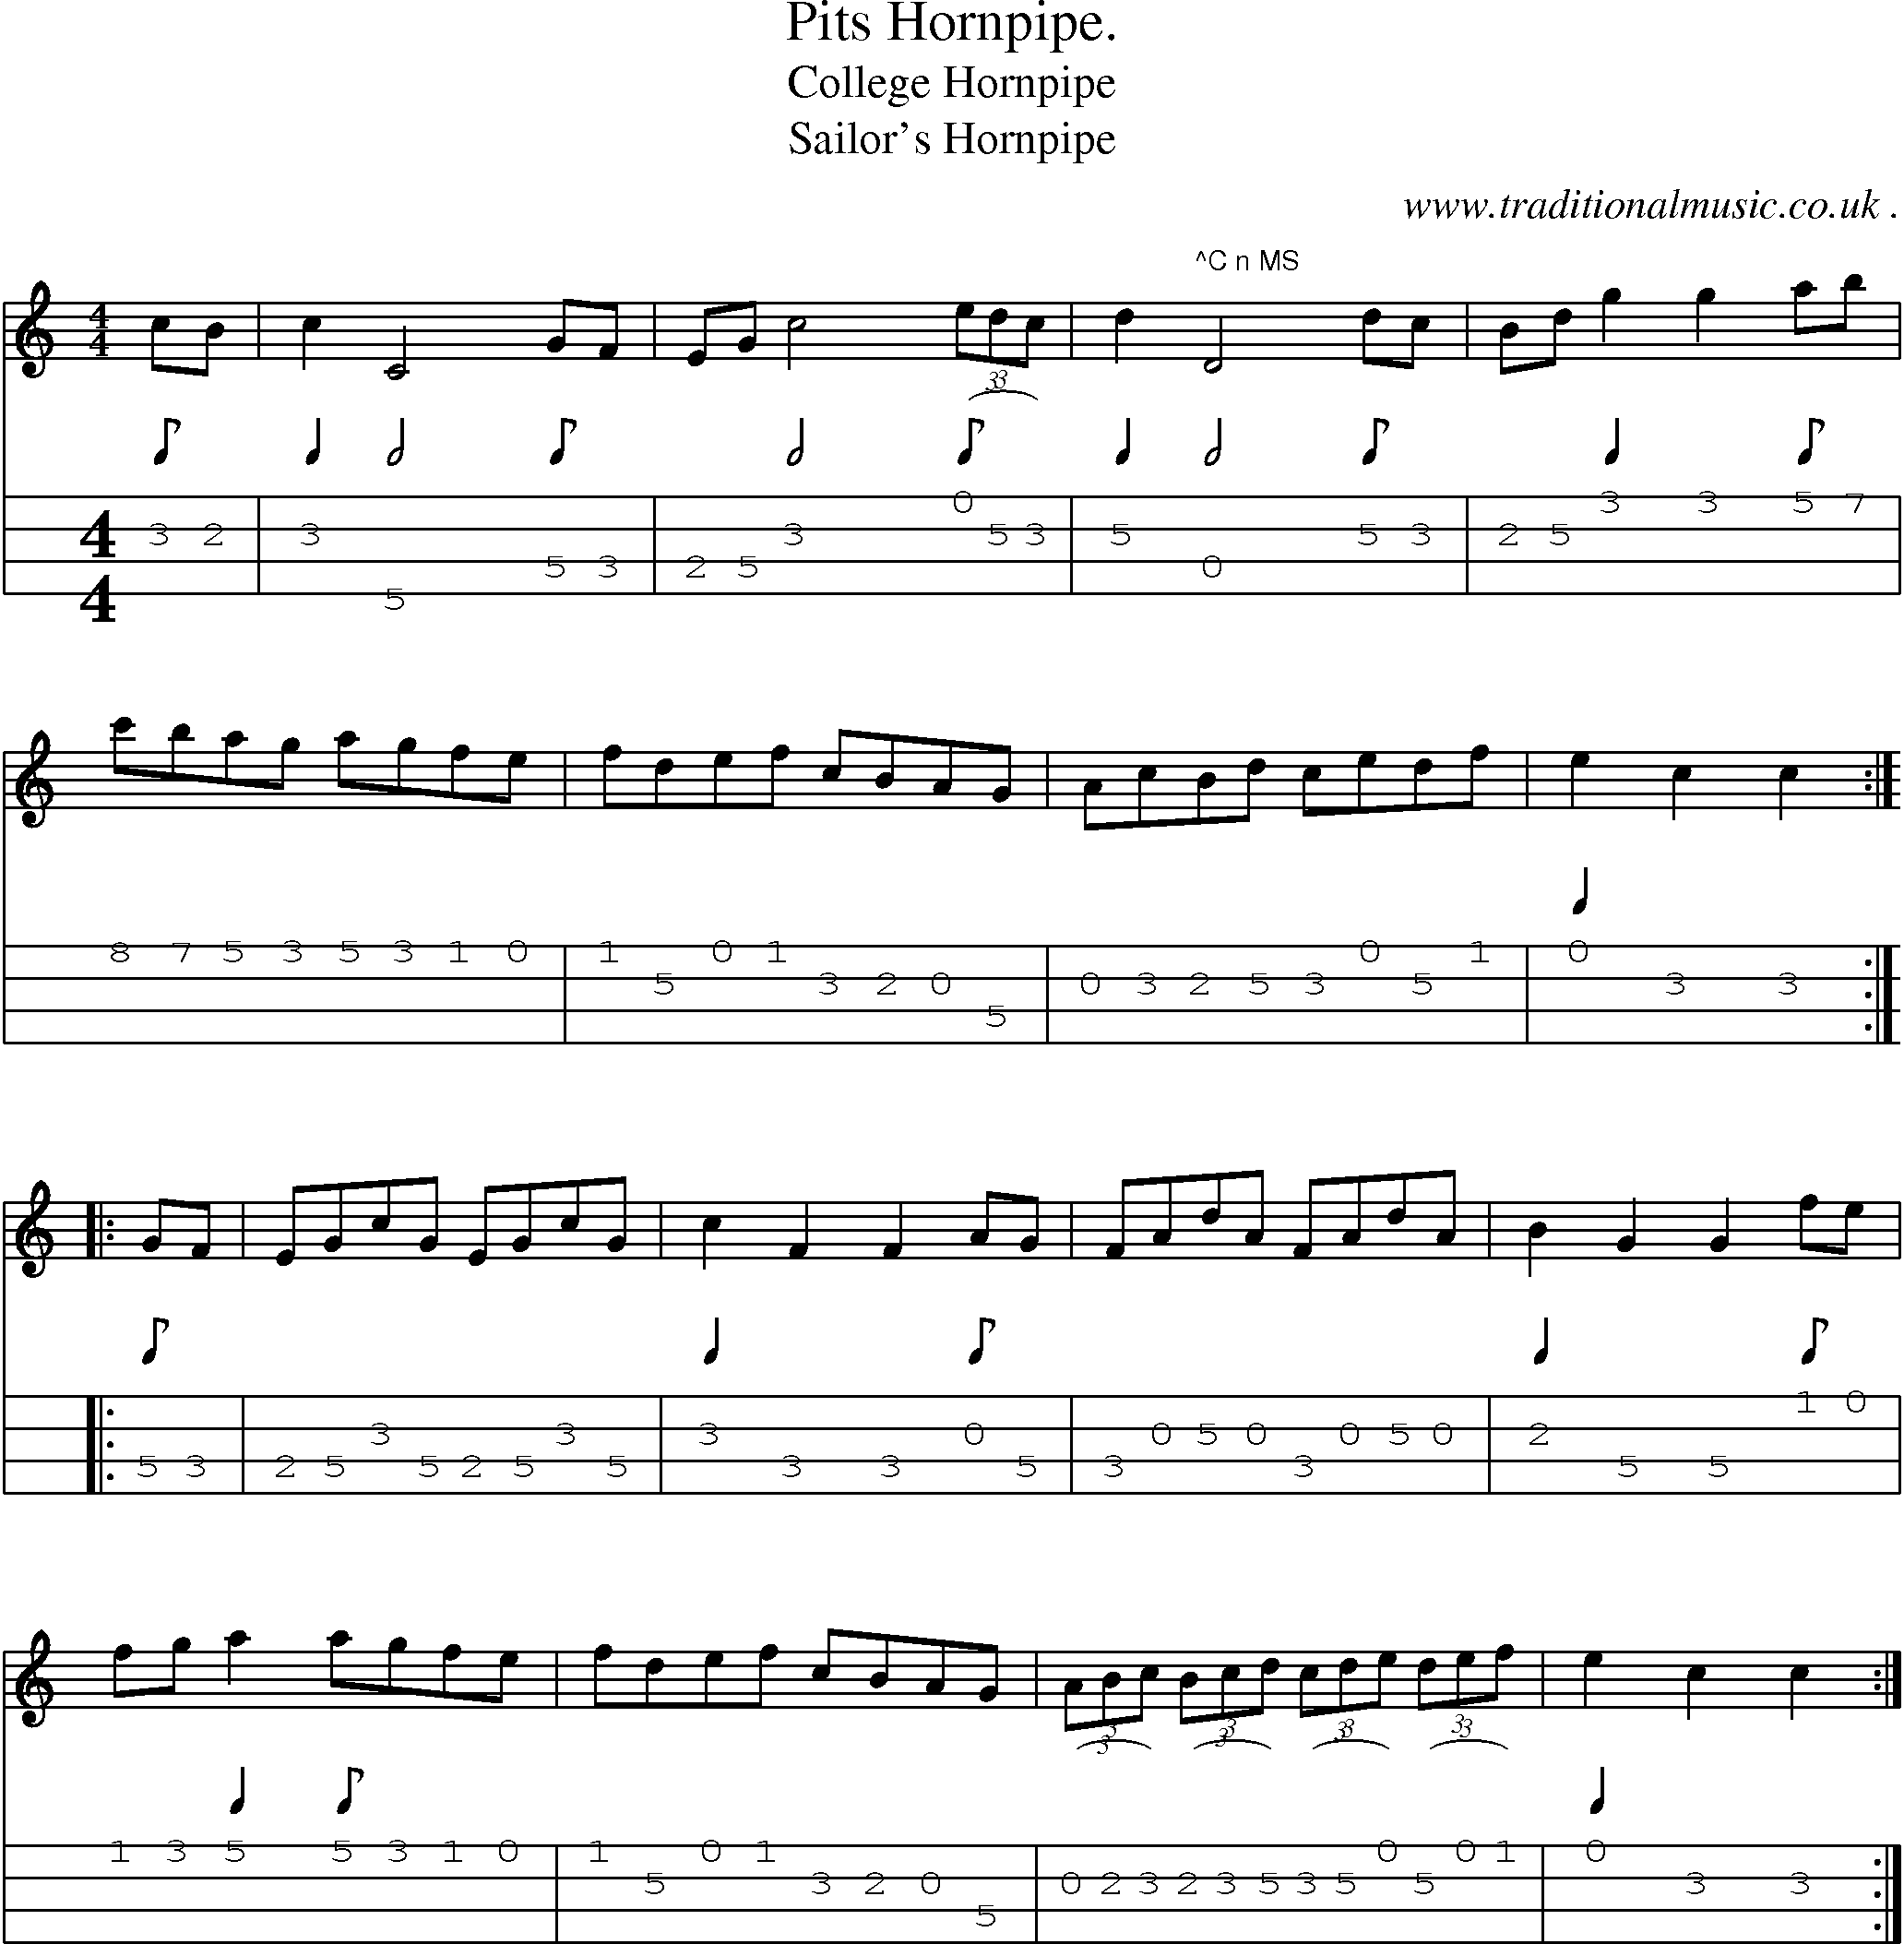 Sheet-Music and Mandolin Tabs for Pits Hornpipe